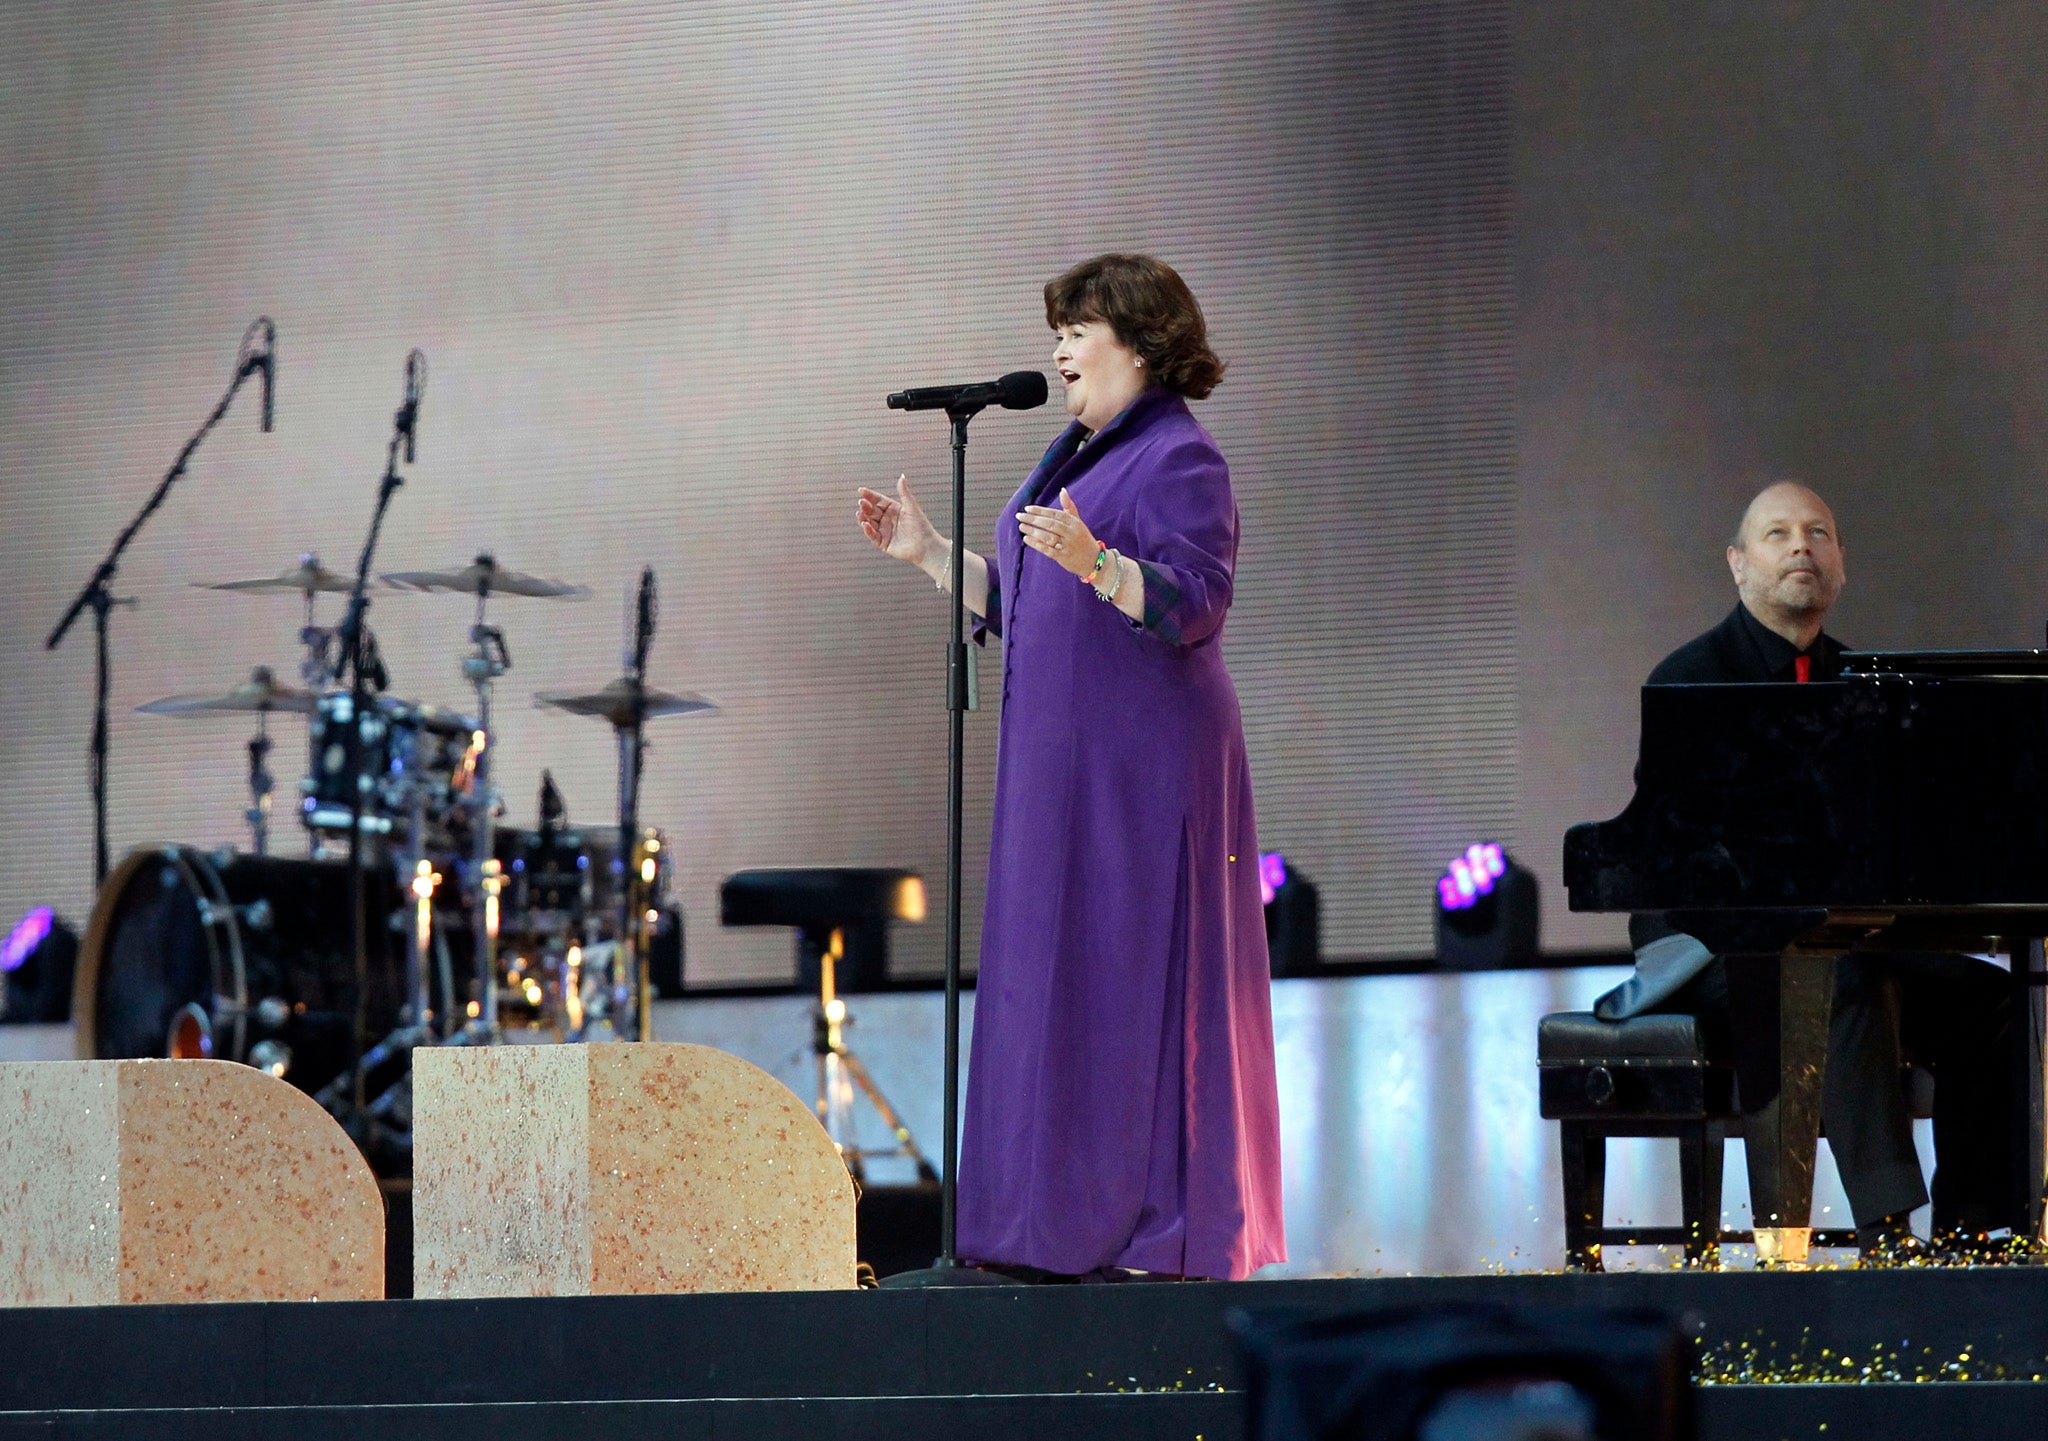 Susan Boyle performs at the Commonwealth Games opening ceremony in Glasgow's Celtic Park